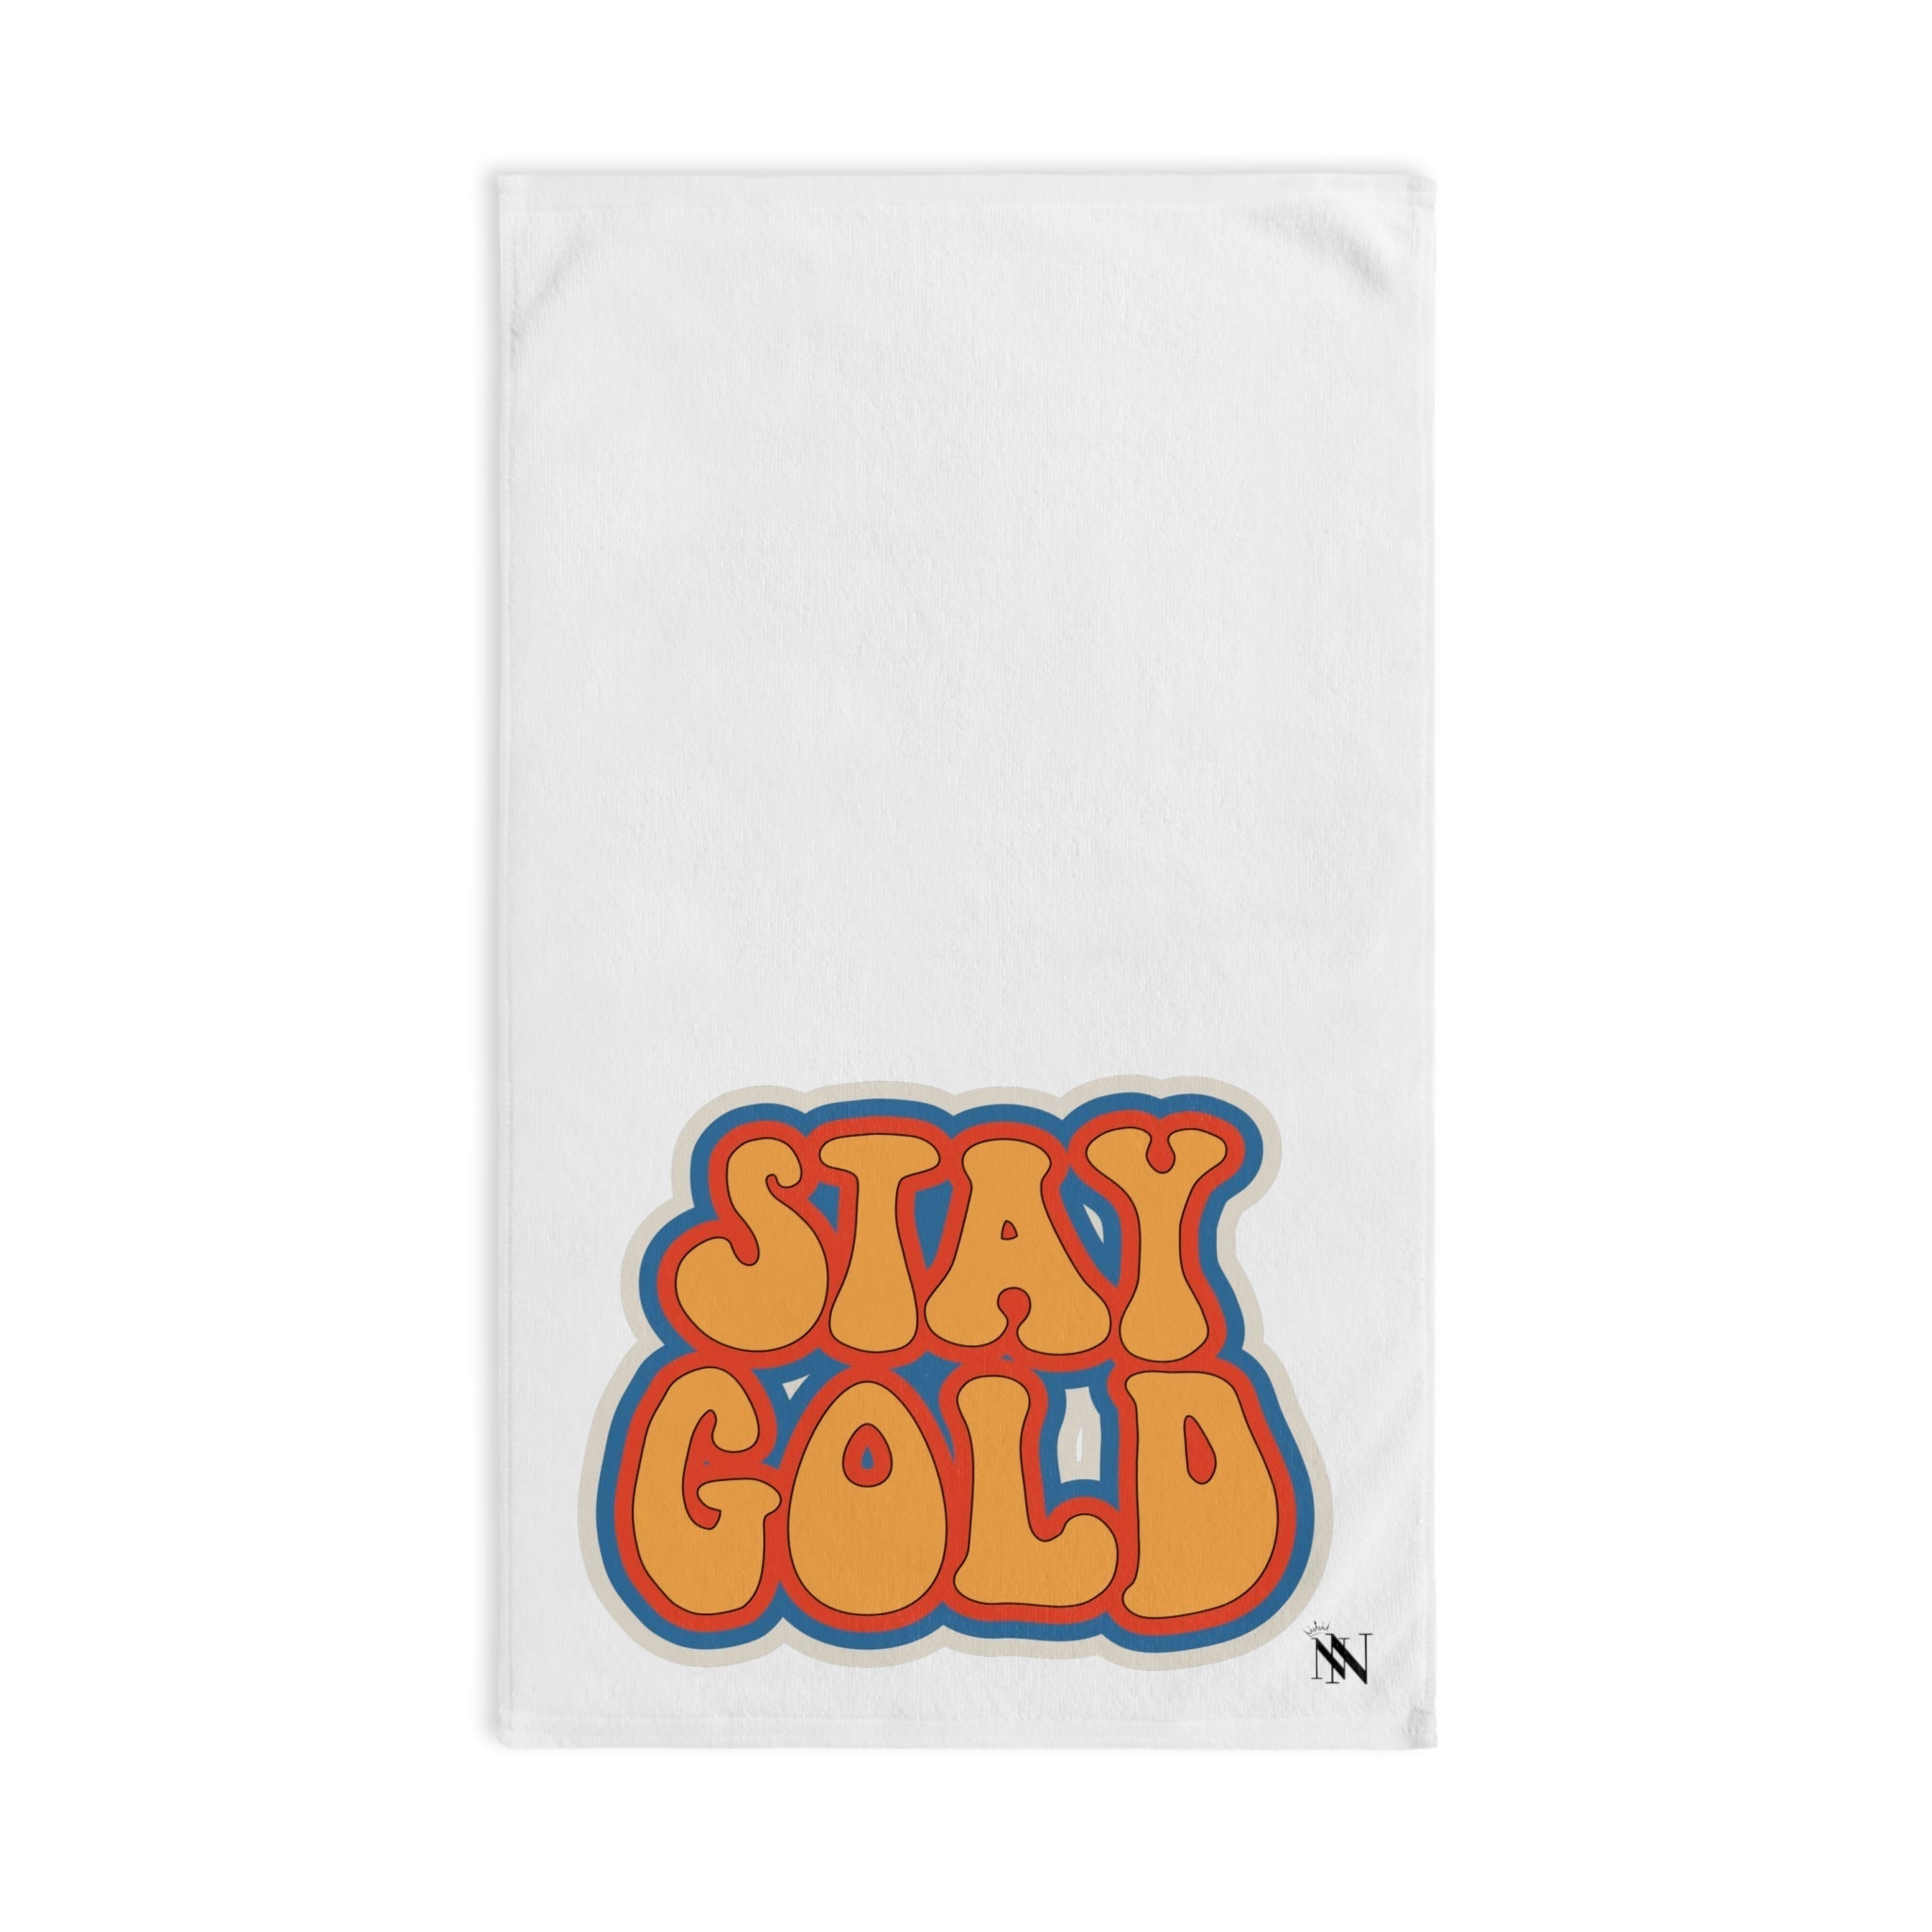 Stay Gold RetroWhite | Funny Gifts for Men - Gifts for Him - Birthday Gifts for Men, Him, Her, Husband, Boyfriend, Girlfriend, New Couple Gifts, Fathers & Valentines Day Gifts, Christmas Gifts NECTAR NAPKINS